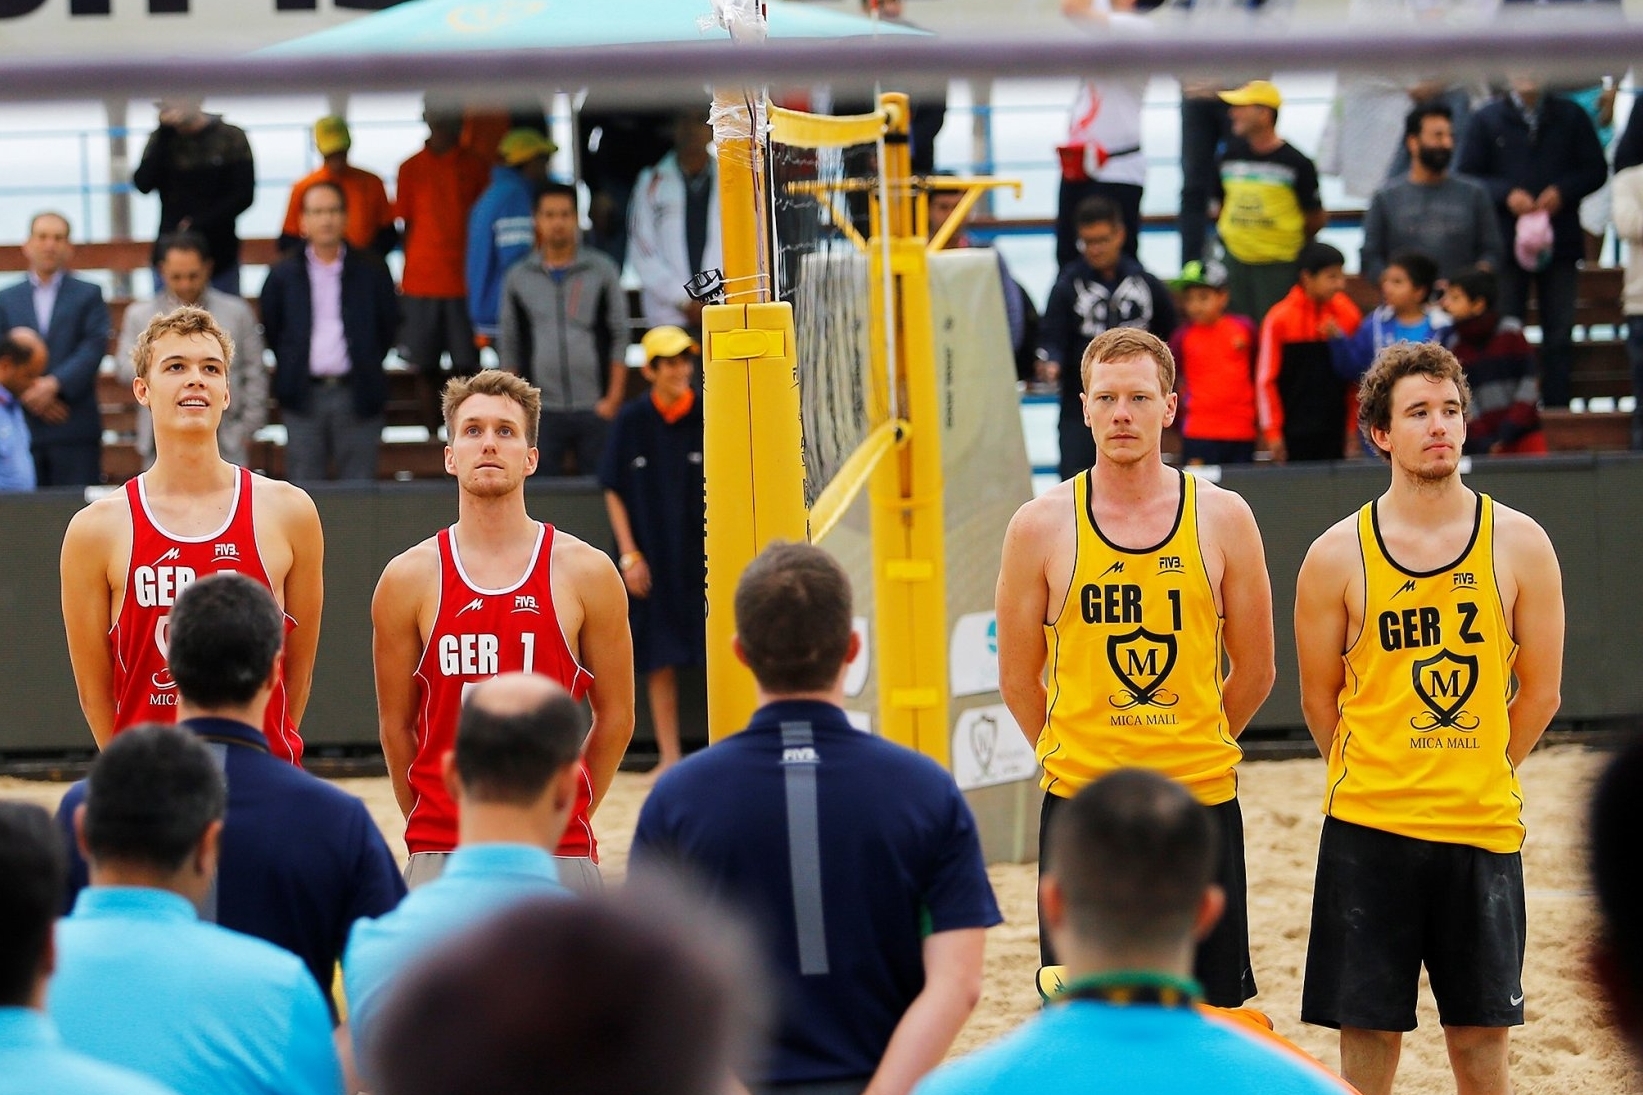 Until now, there has always been the net between: Lorenz Schümann (second from the left) with Julius Thole (left) and Markus Böckermann (second from the right) with Lars Flüggen (right). Credit: FIVB.